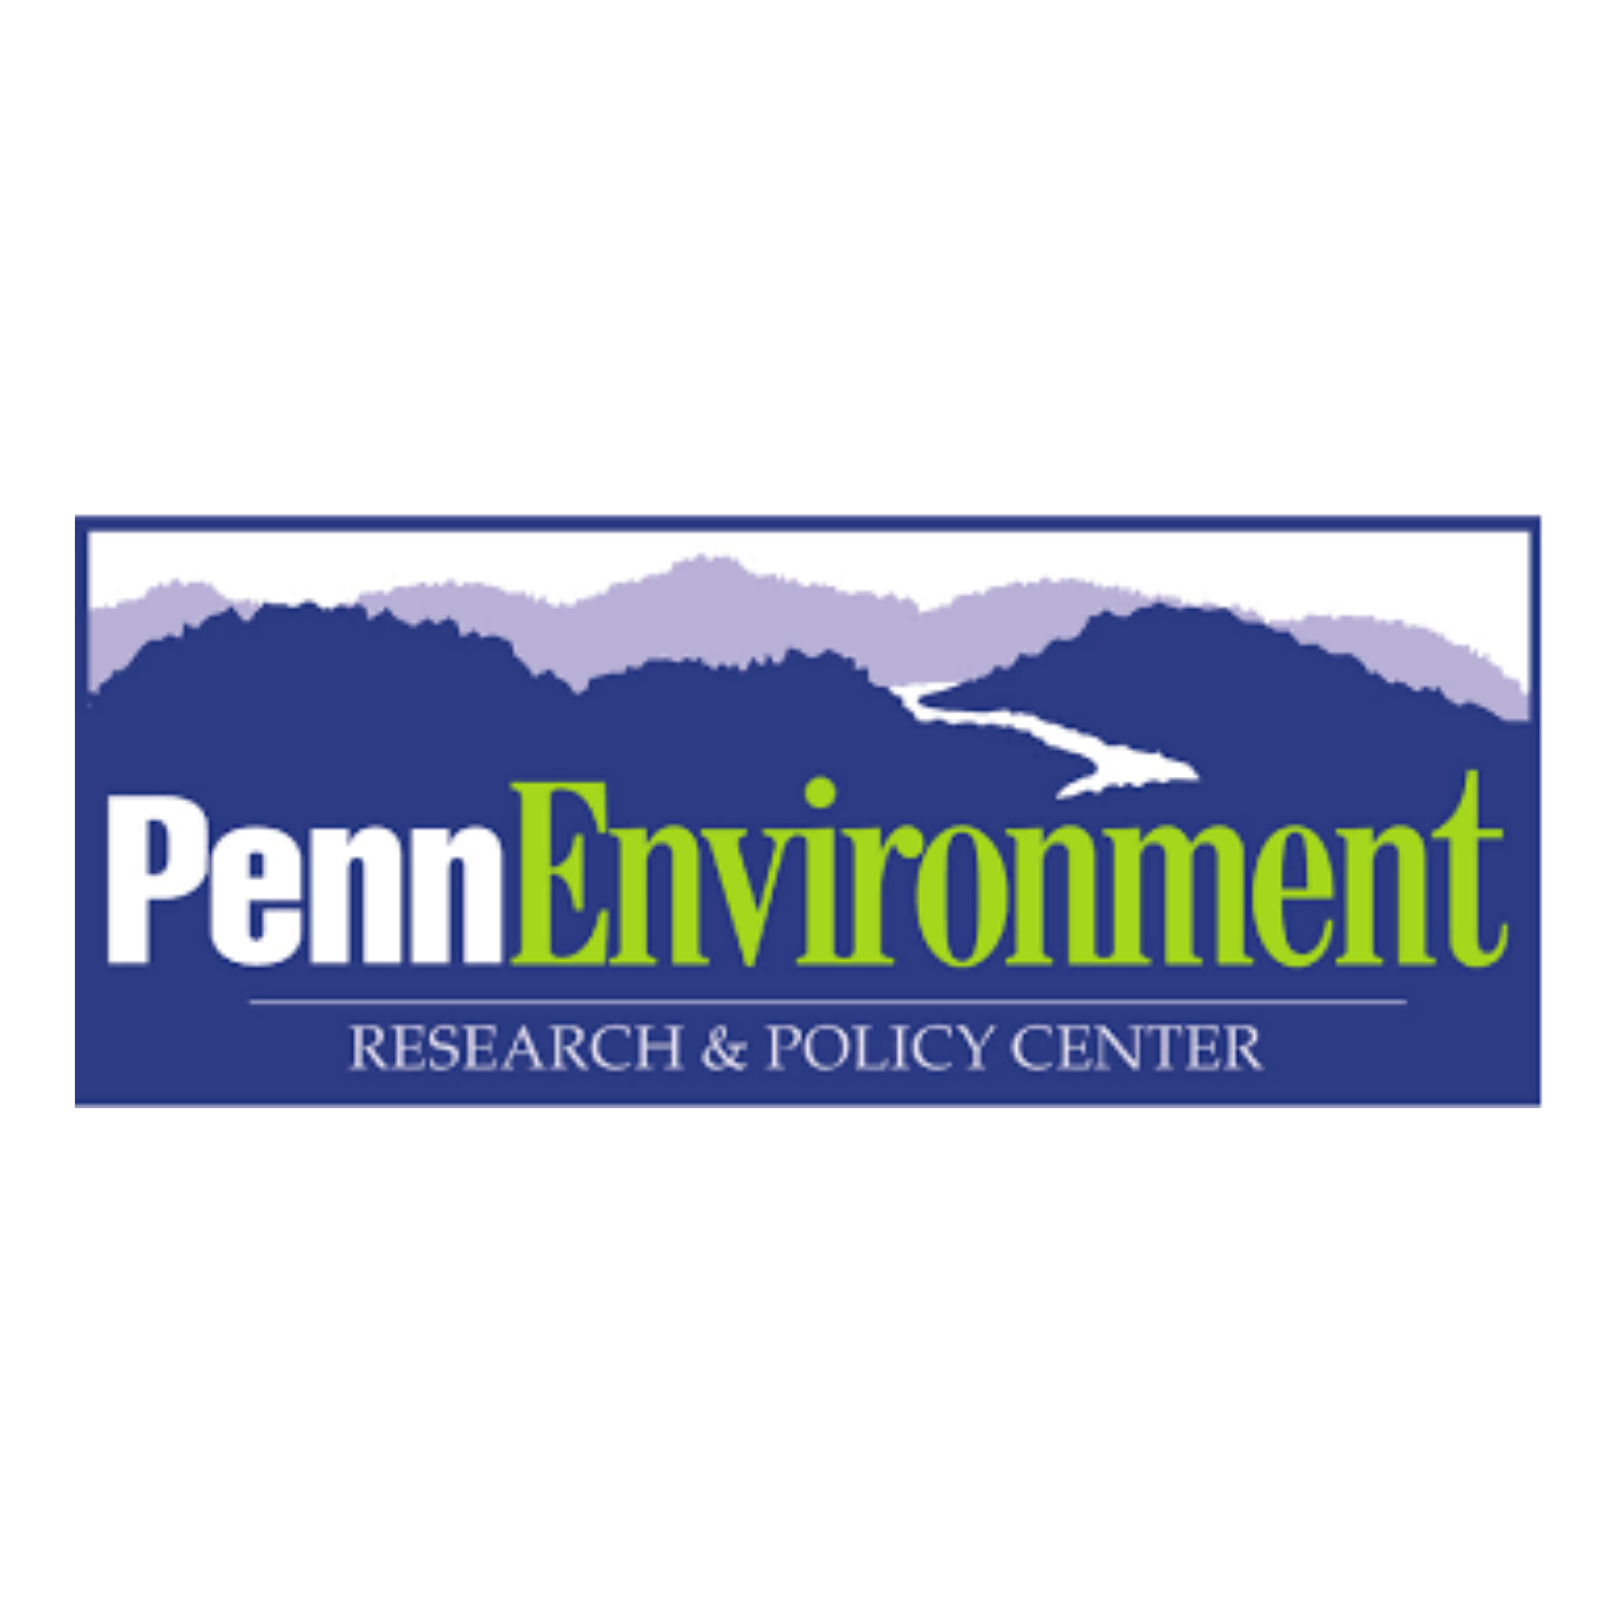 PennEnvironment Research and Policy Center